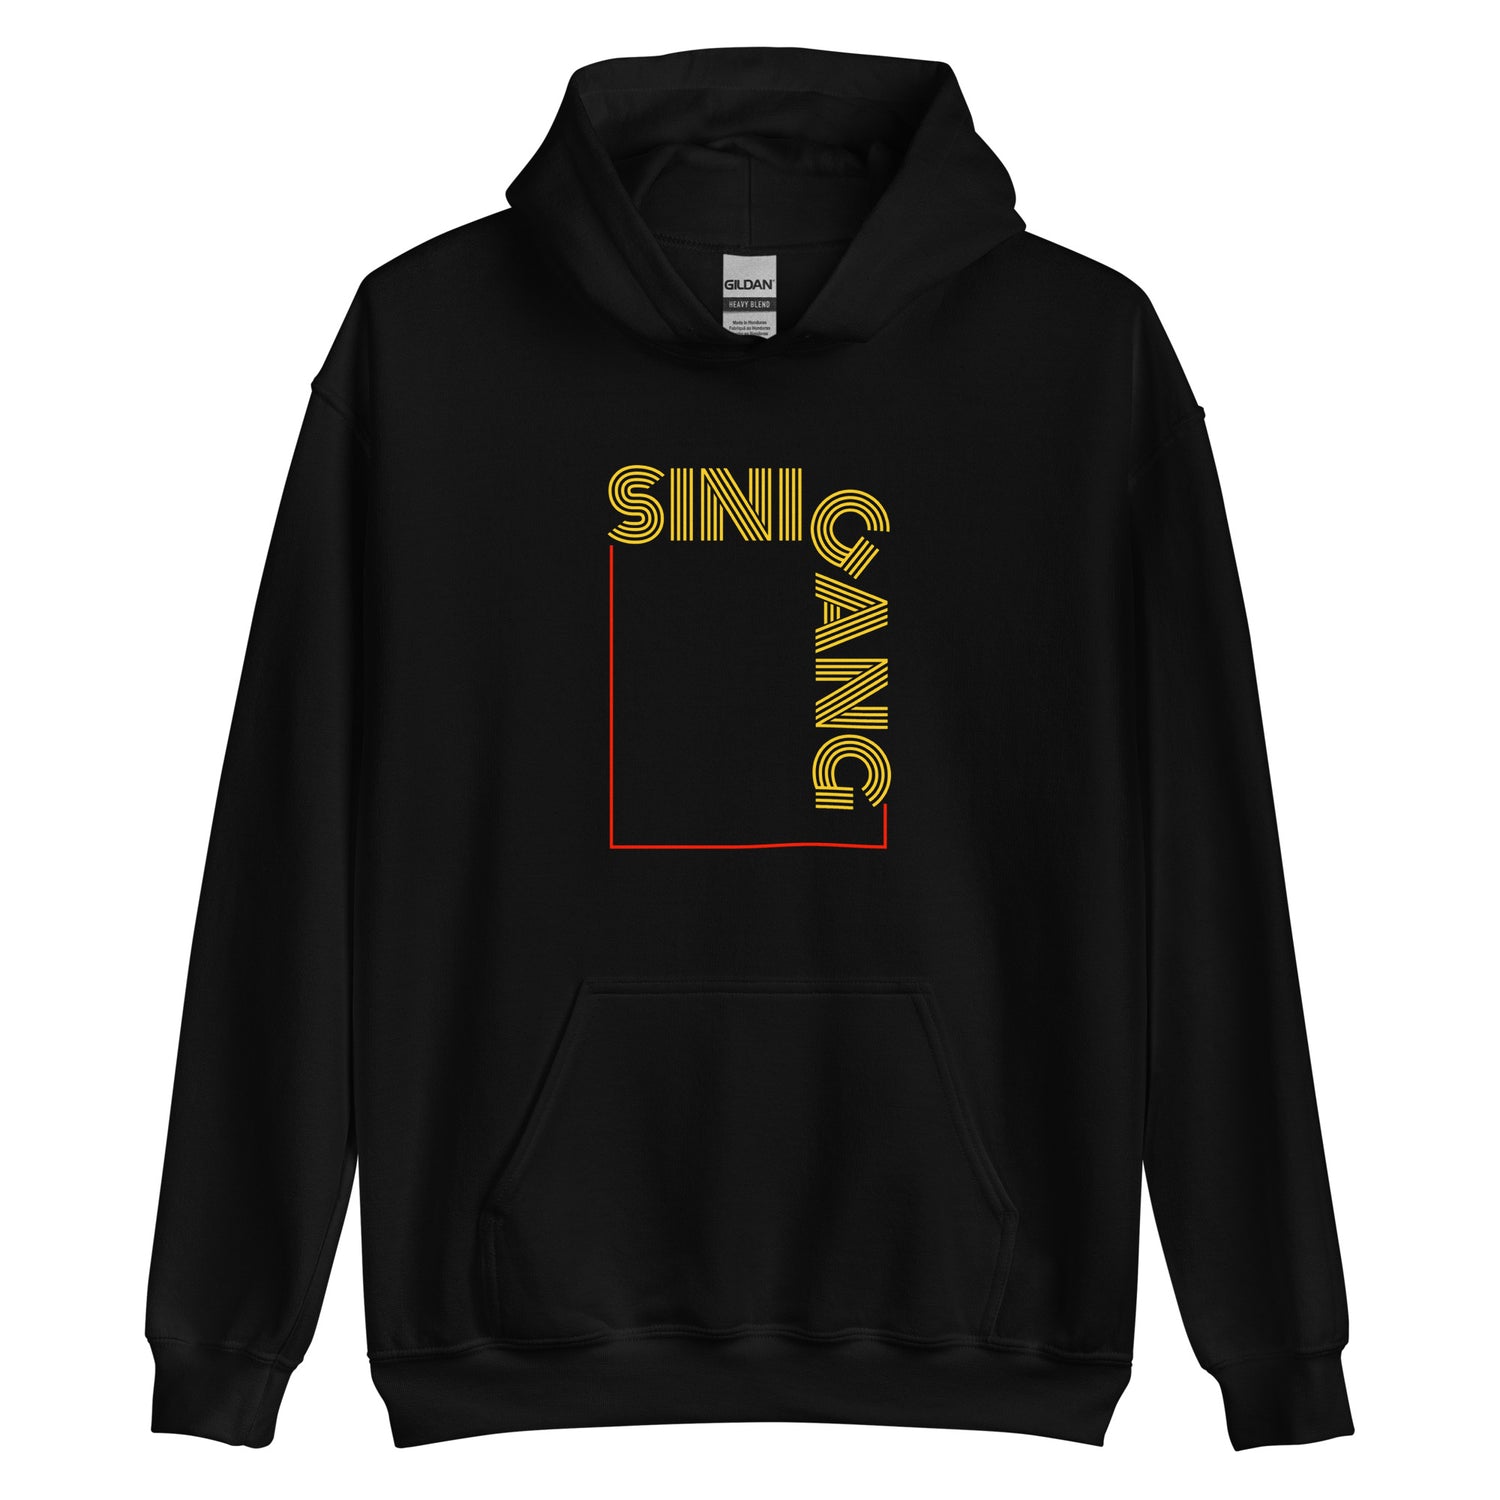 Filipino Hoodie Sinigang Pinoy Food Merch in color variant Black